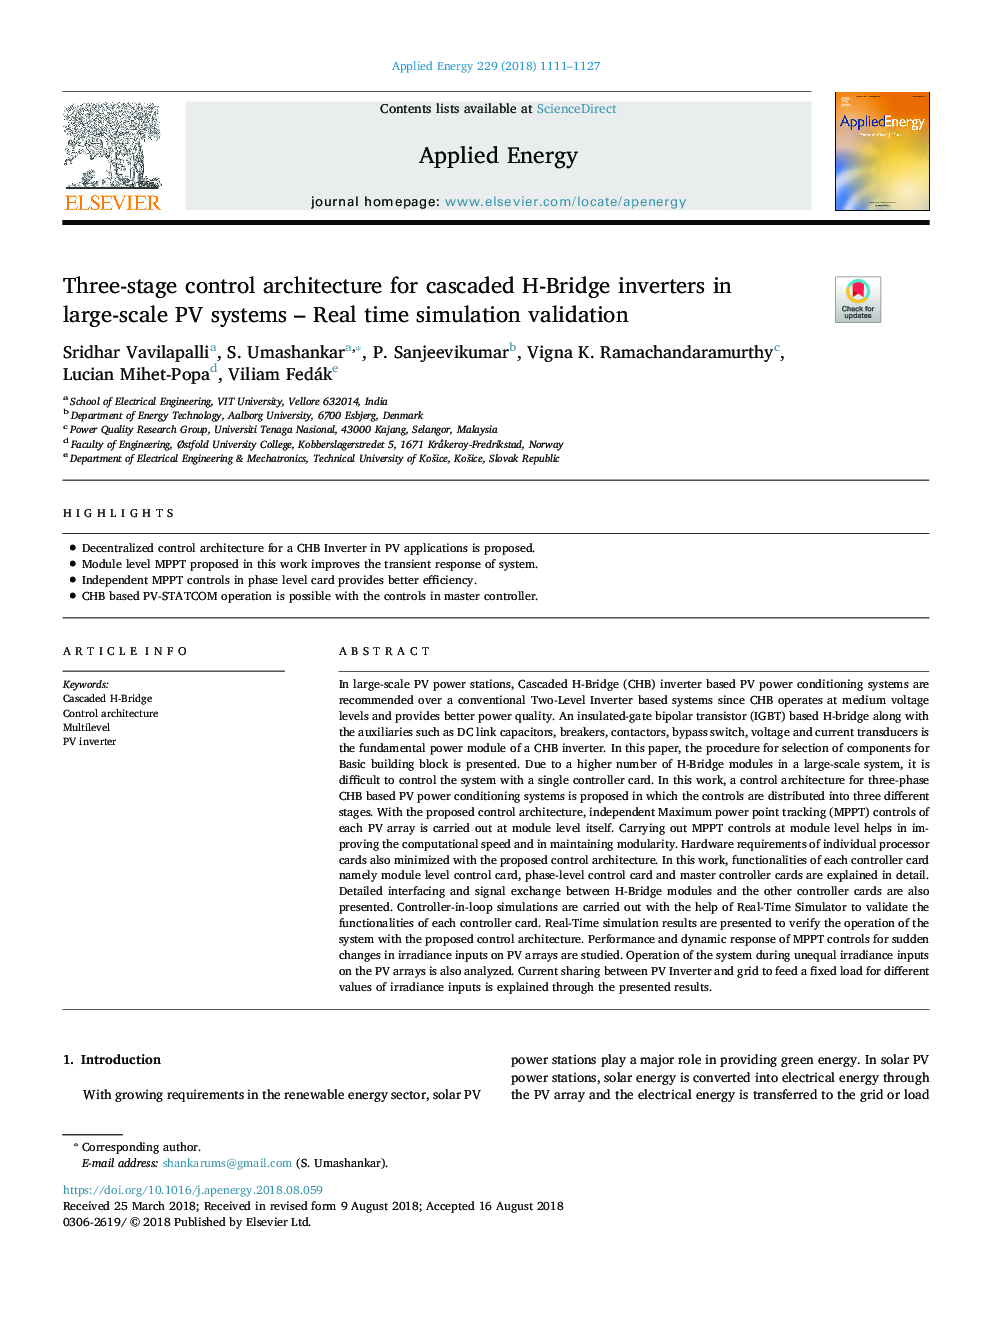 Three-stage control architecture for cascaded H-Bridge inverters in large-scale PV systems - Real time simulation validation